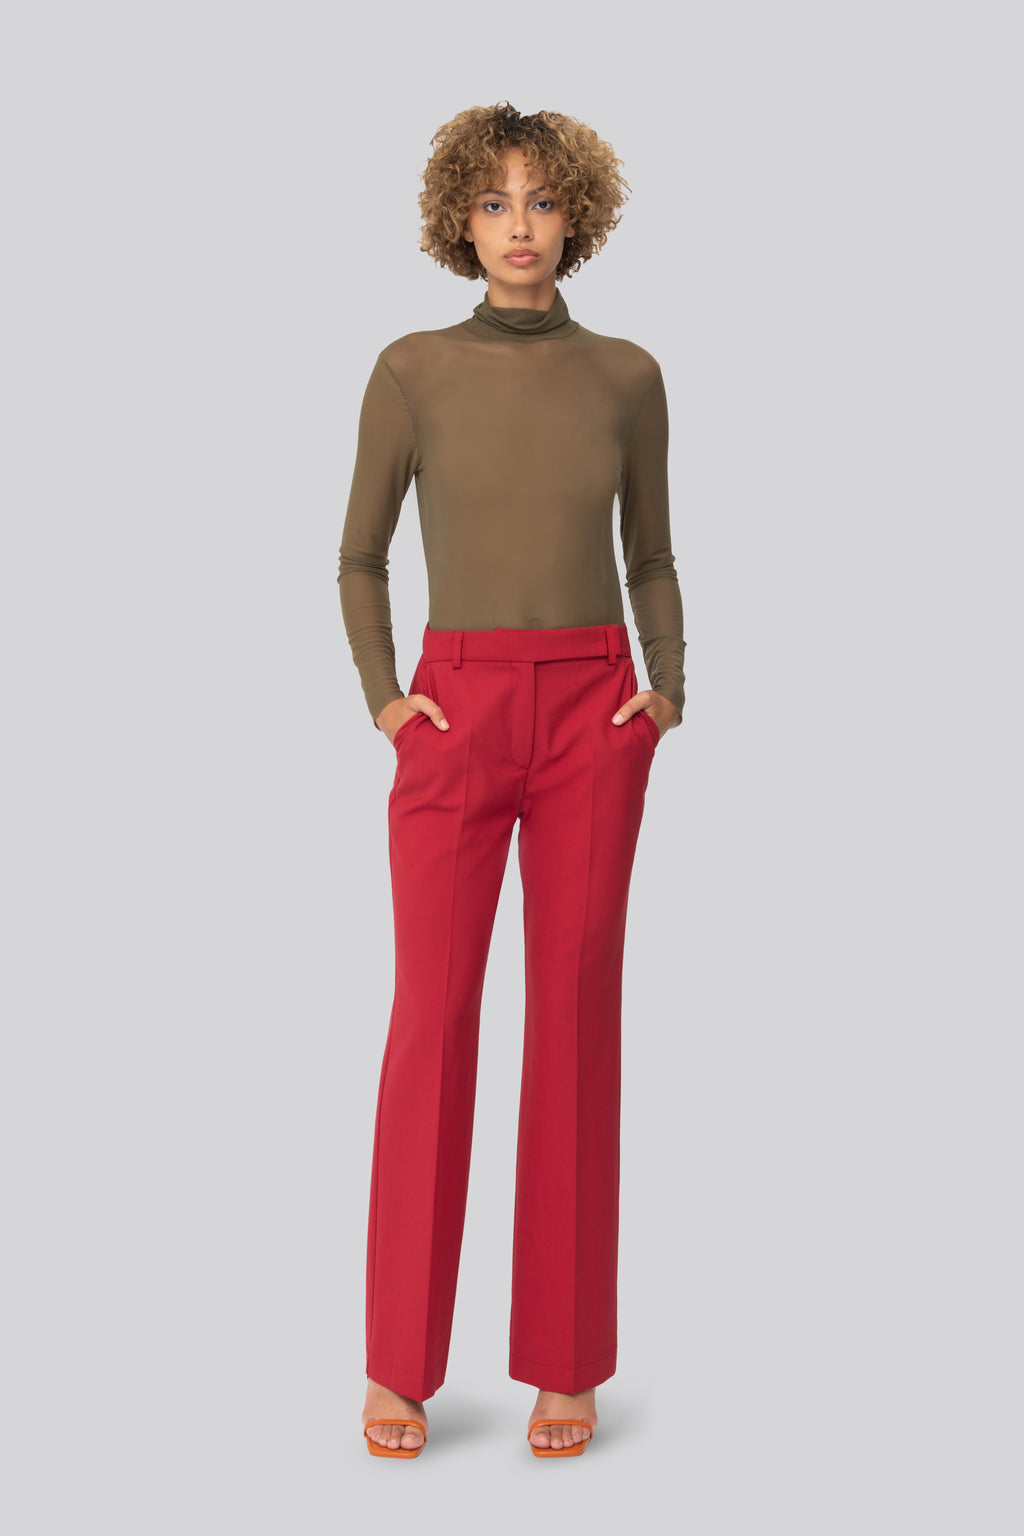 The Red Canvas Lover Pants